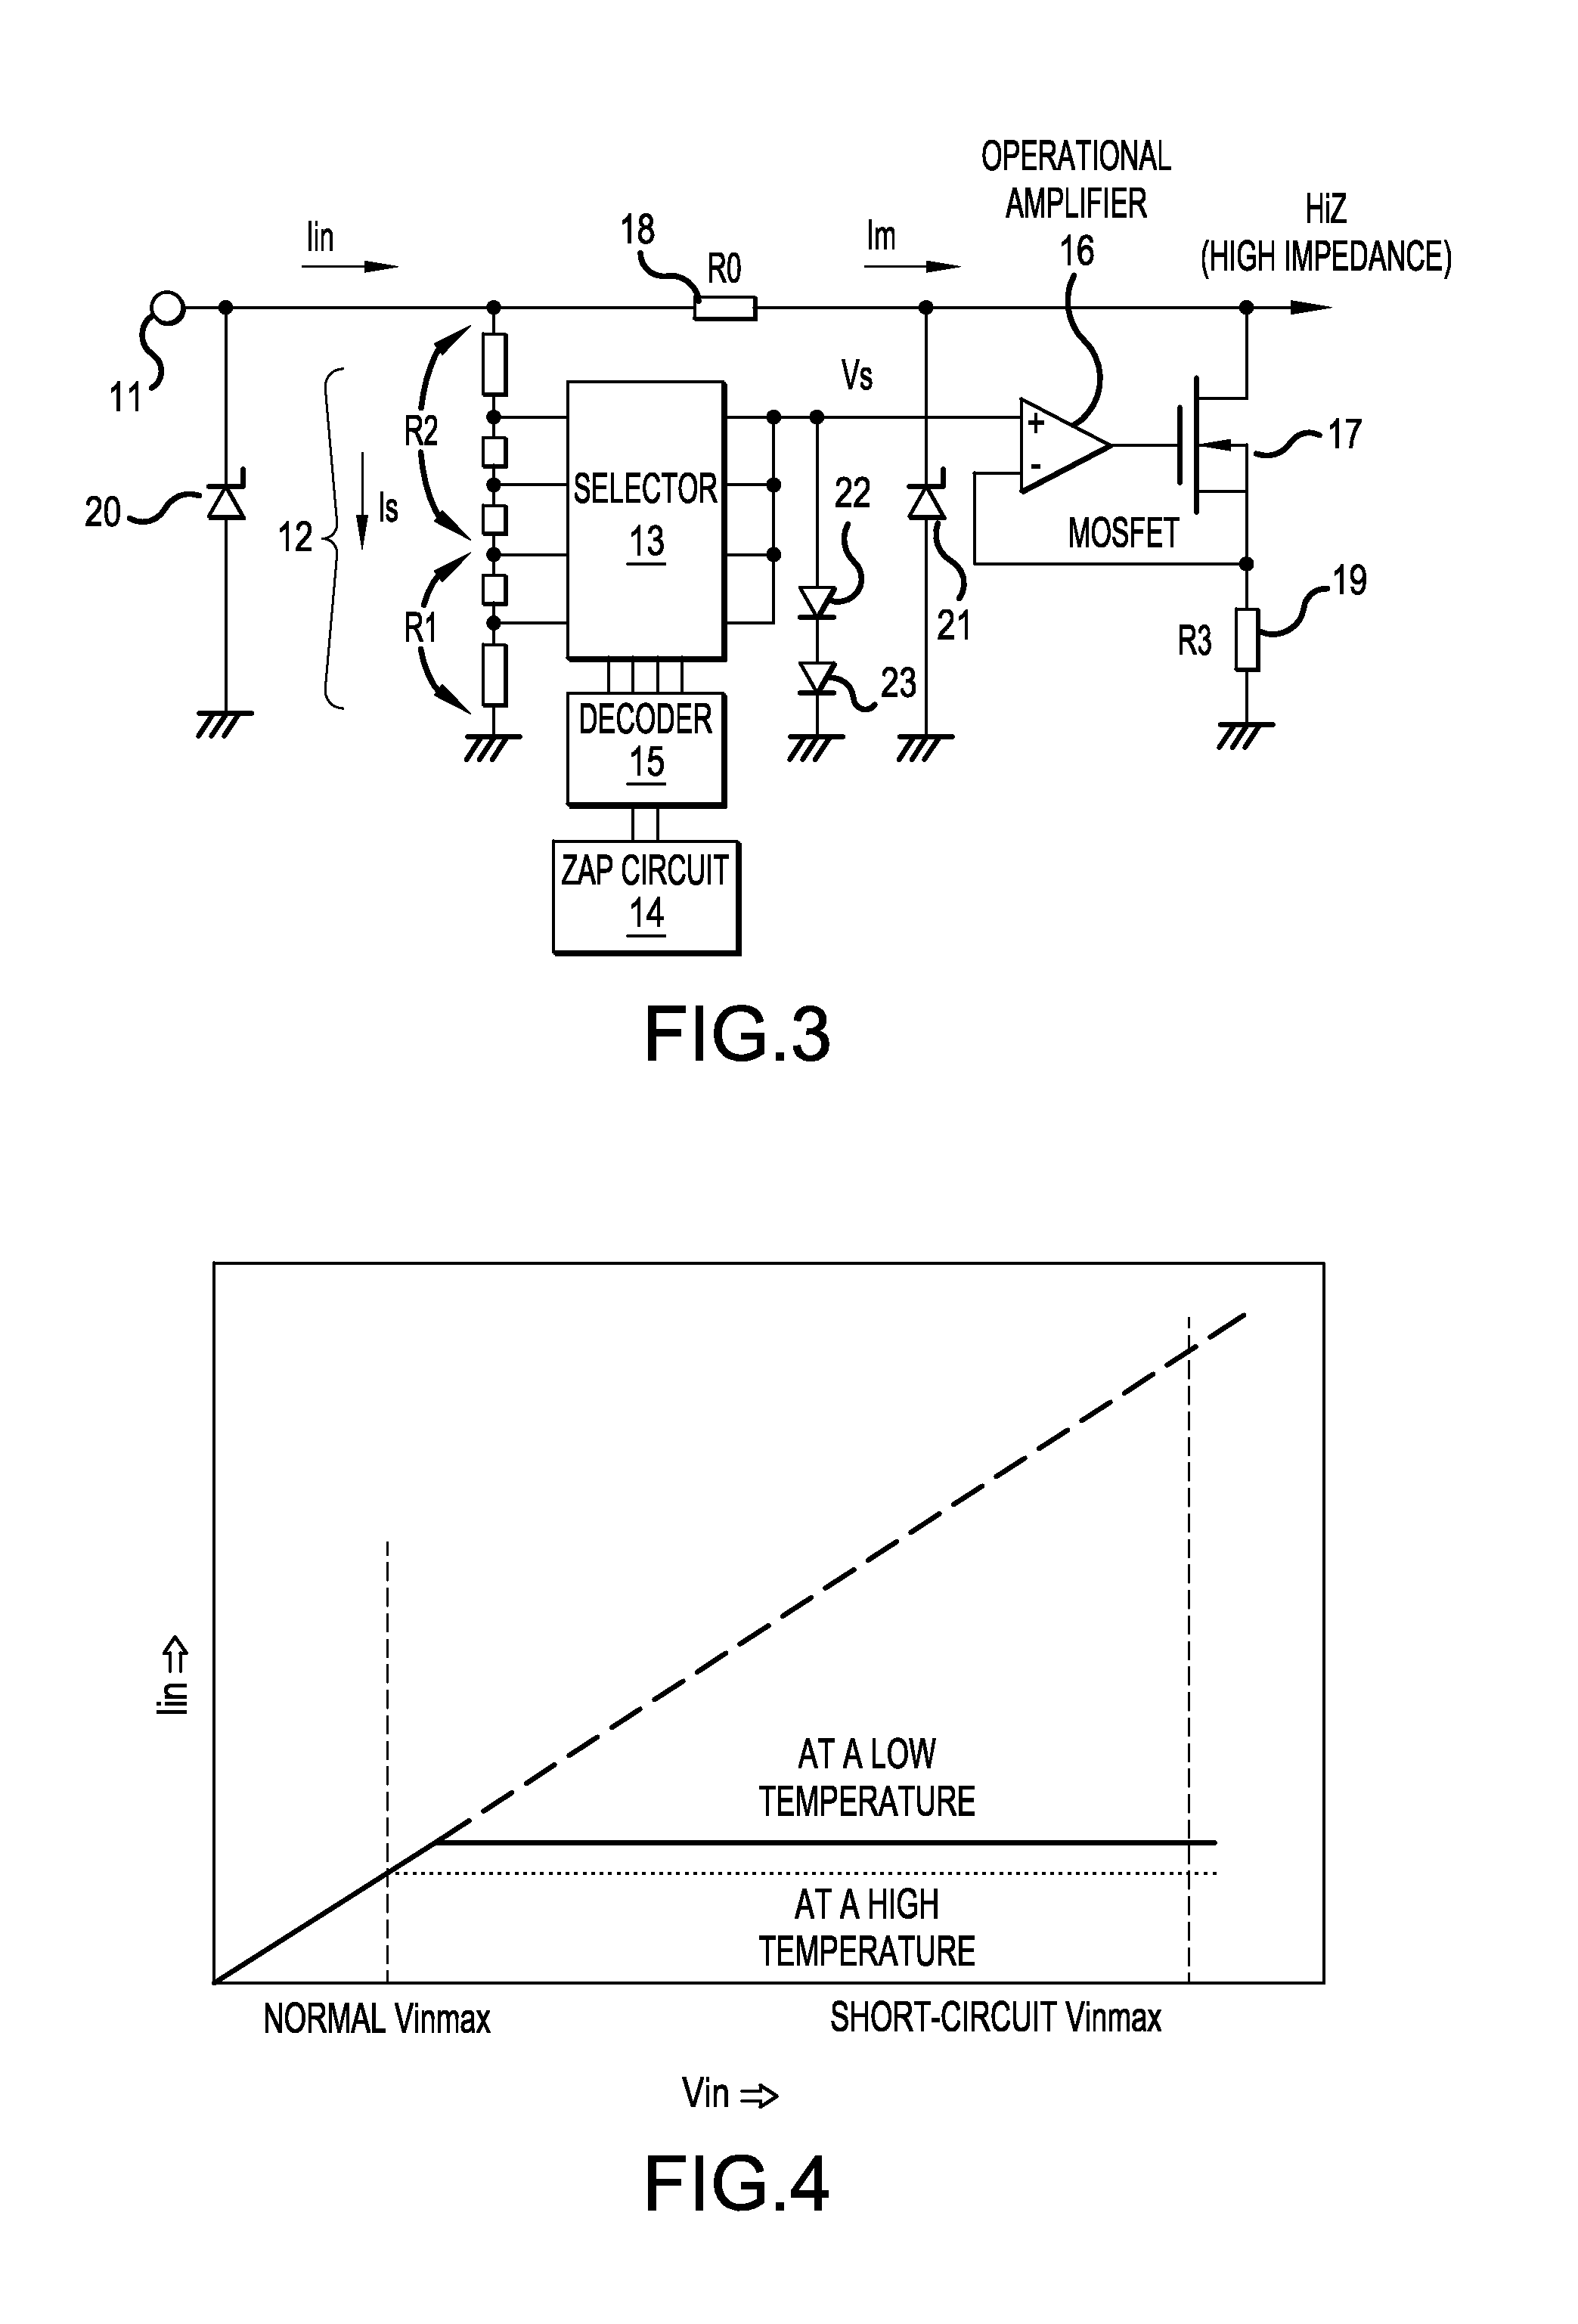 Input circuit includes a constant current circuit